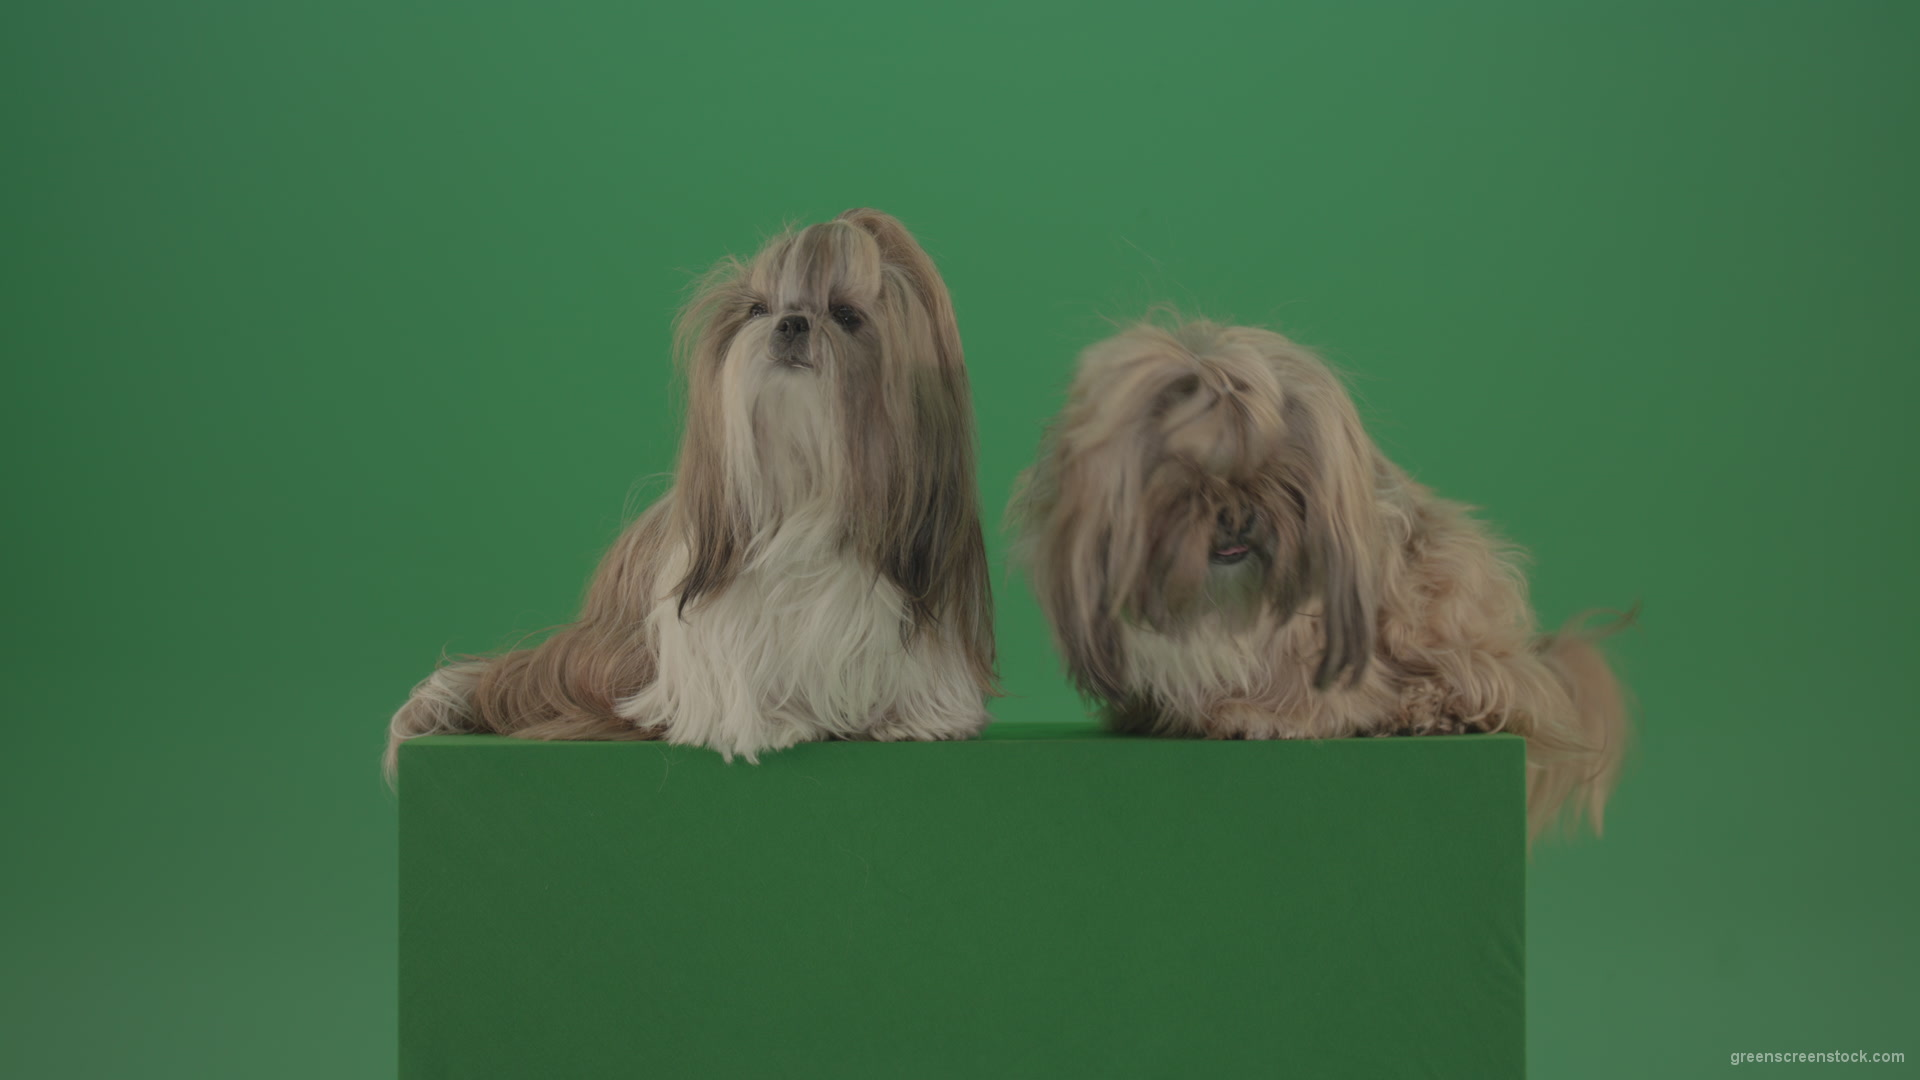 Award-winning-Small-toy-Shihtzu-Dogs-isolated-on-green-screen_001 Green Screen Stock